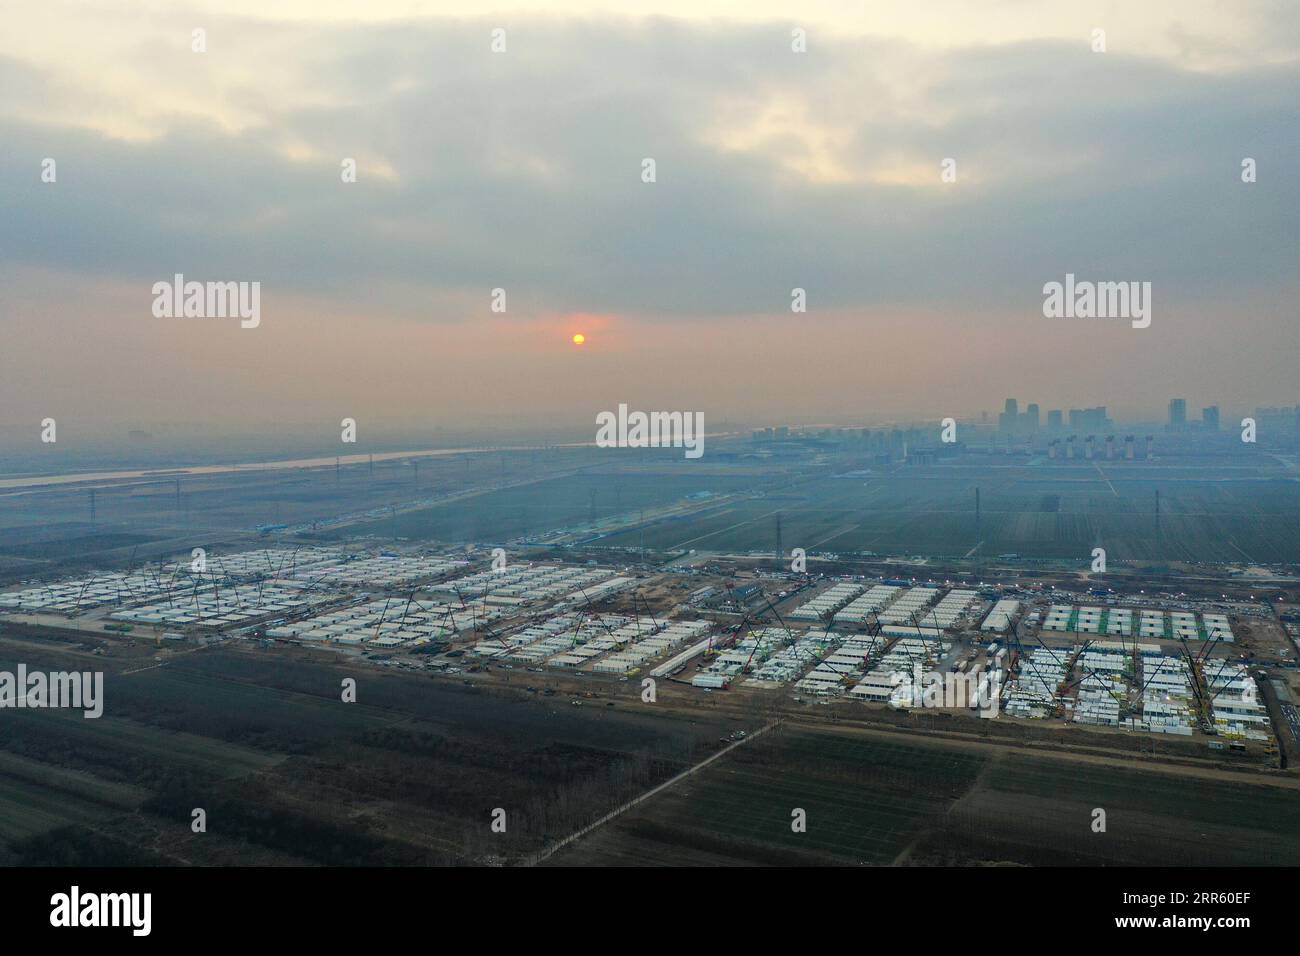 210120 -- SHIJIAZHUANG, Jan. 20, 2021 -- Aerial photo taken on Jan. 19, 2021 shows the construction site of Huangzhuang apartment COVID-19 quarantine center in Shijiazhuang, north China s Hebei Province. Cao Zepan, a technician of China Railway 14th Bureau Group, went to Shijiazhuang to aid the construction of the COVID-19 quarantine center with his colleagues on Jan. 16. Born in 2000, Cao is new but devoted to his work. Cao and other workers stick to their posts despite harsh winter weather, and work around the clock to guarantee the on-time completion of the construction. This is the first k Stock Photo